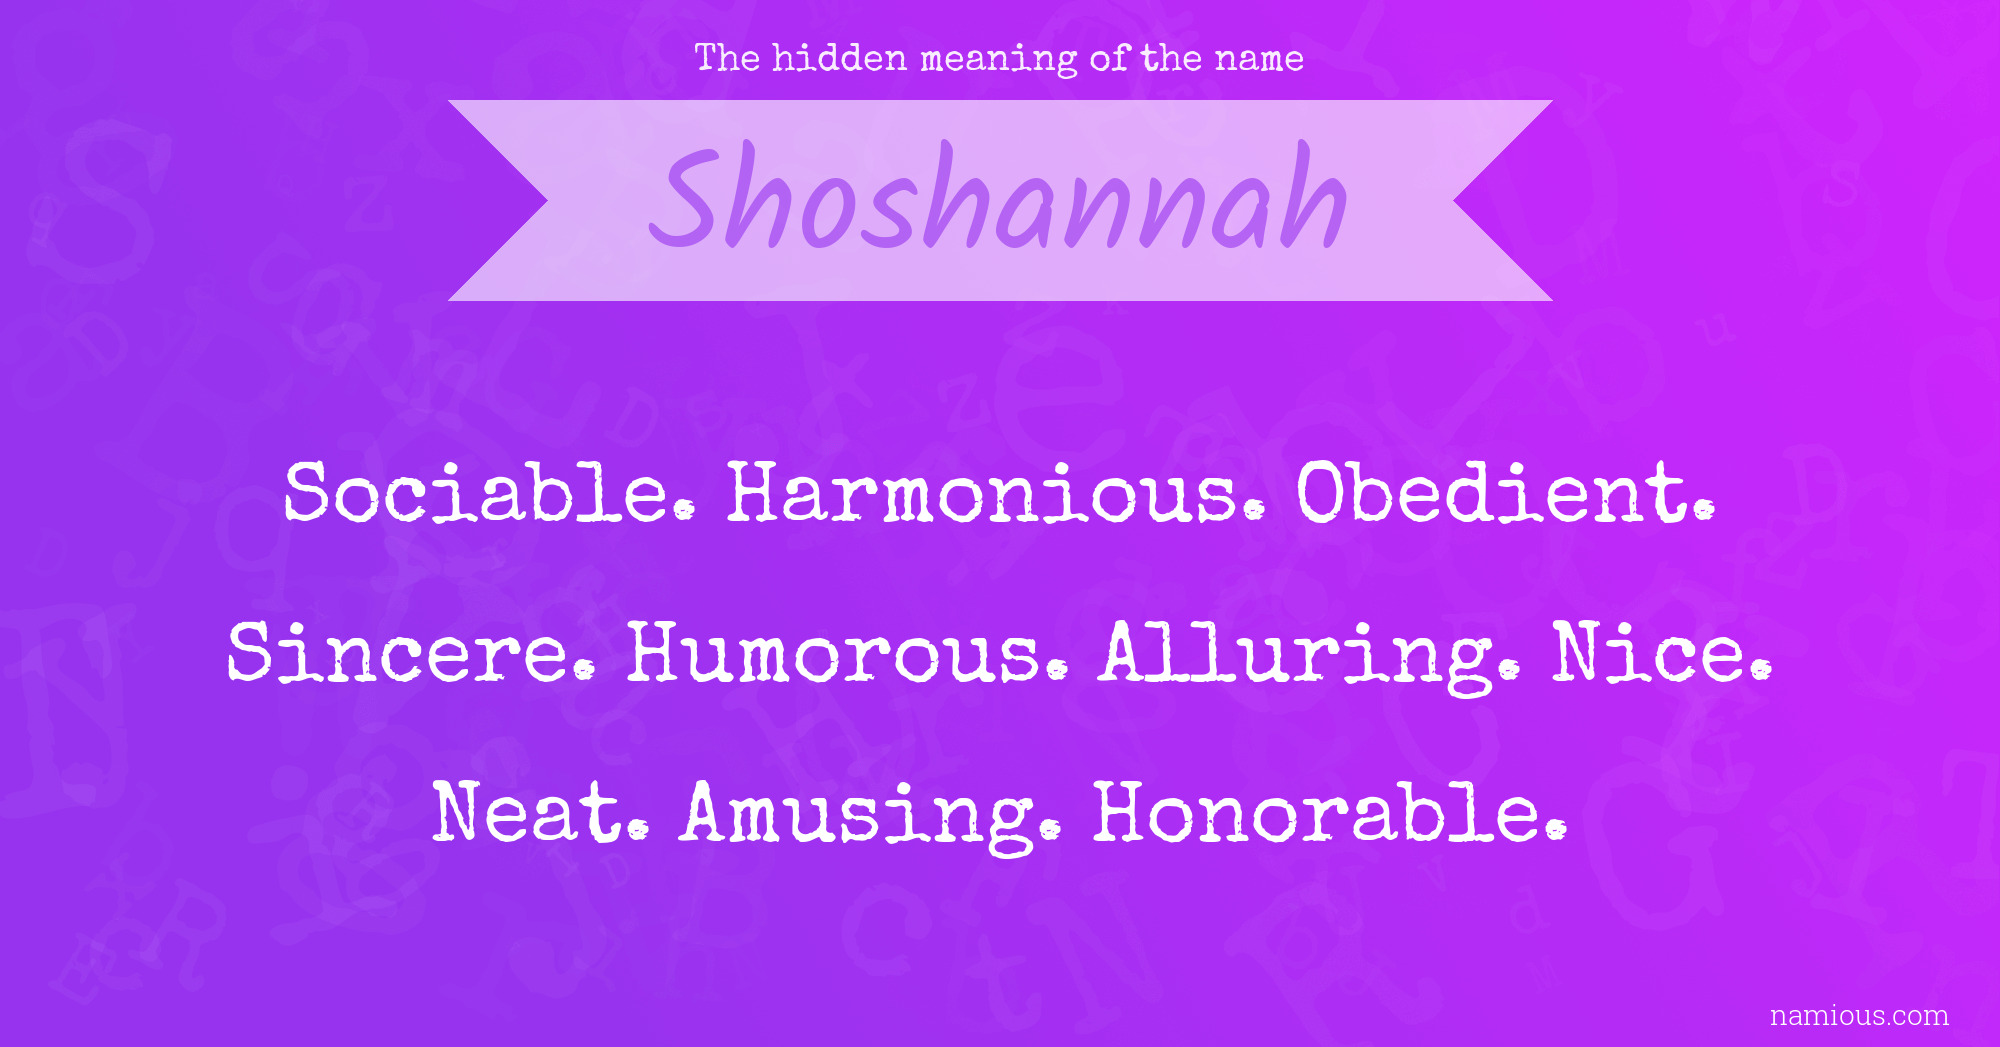 The hidden meaning of the name Shoshannah